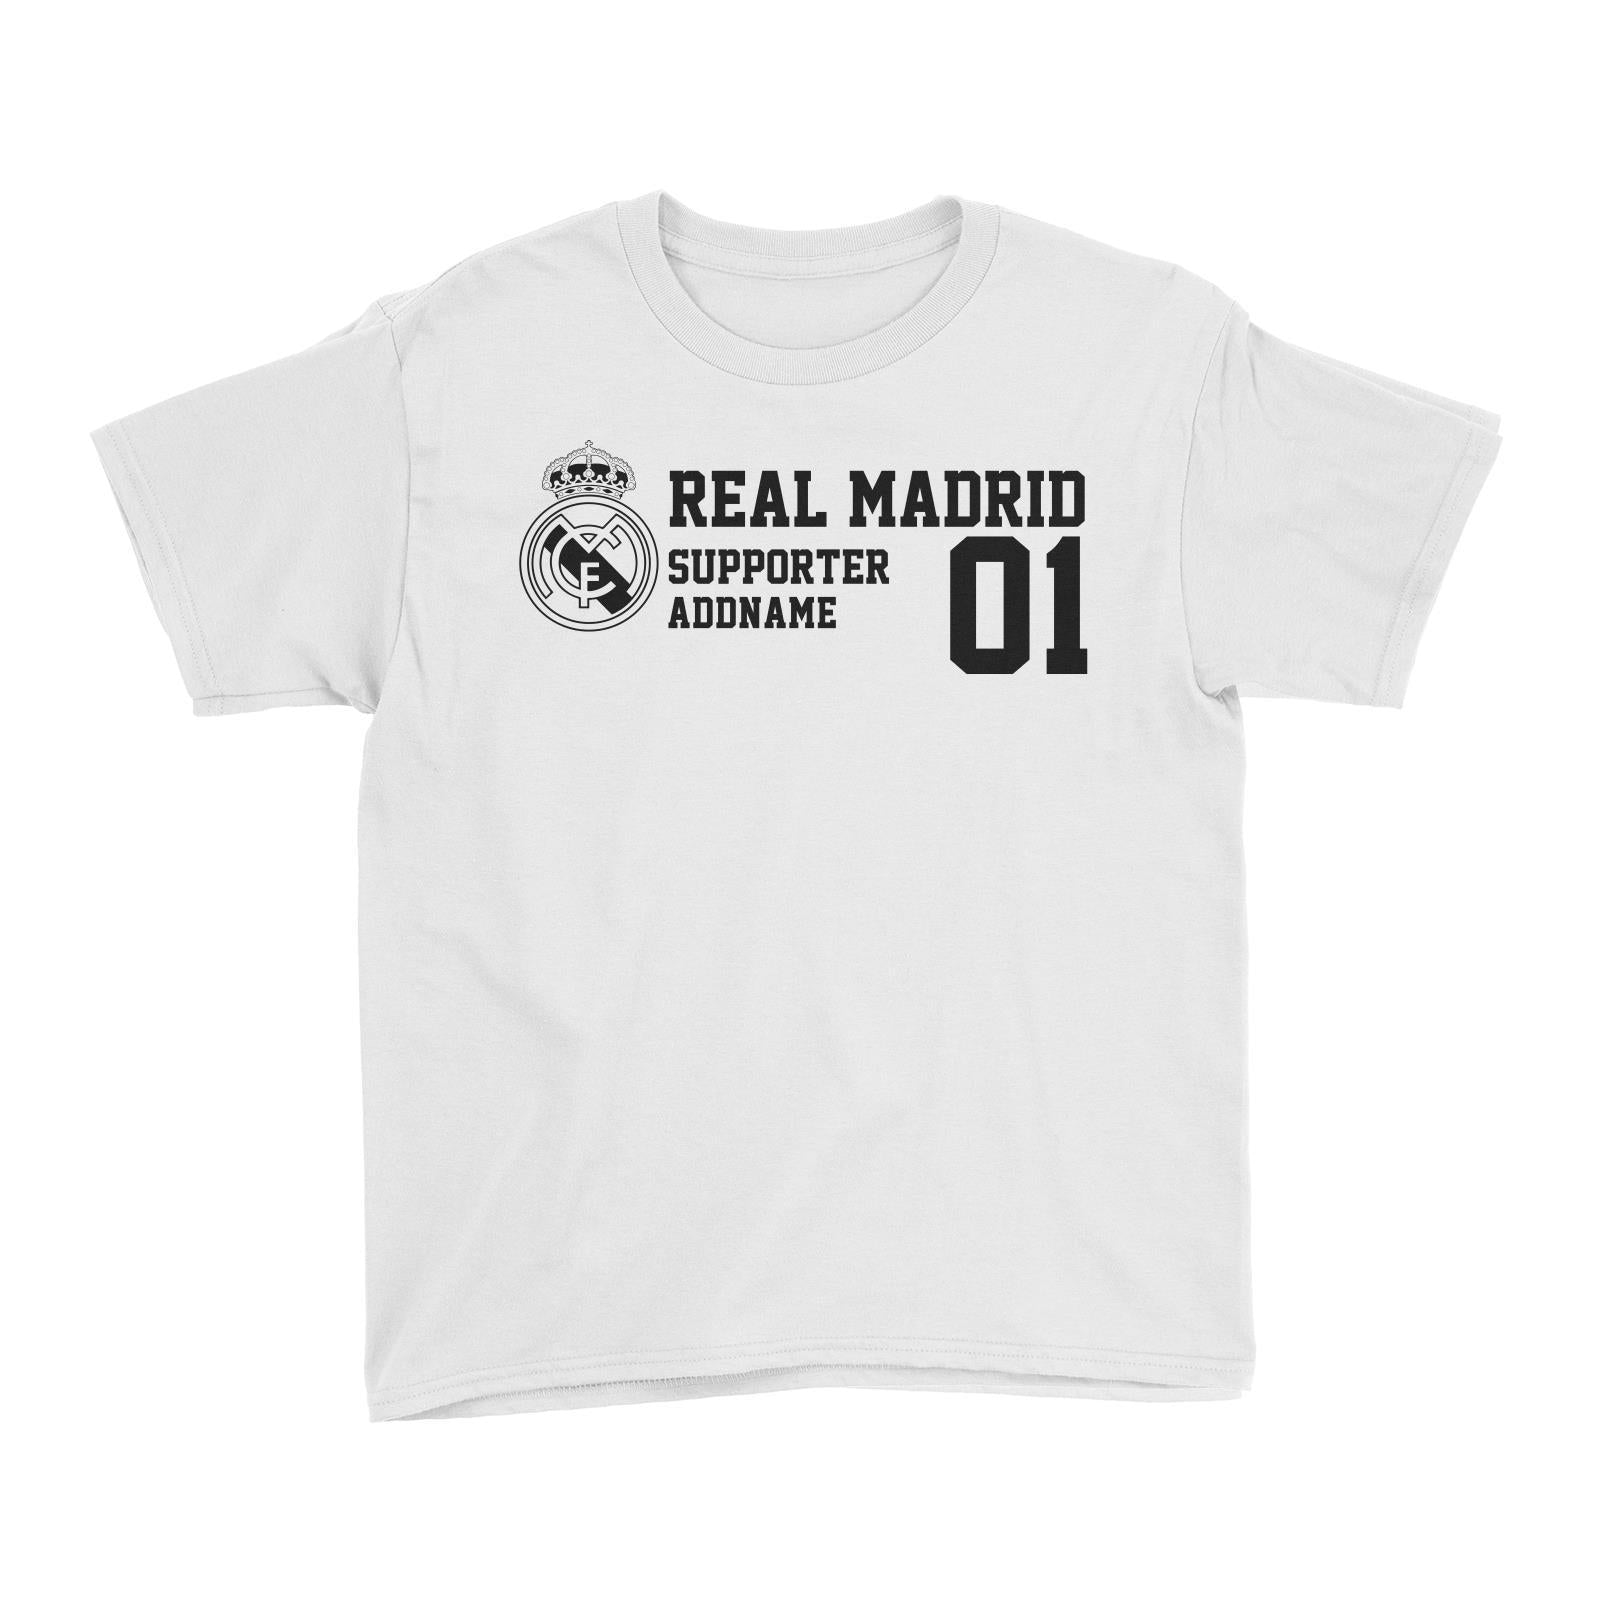 Real Madrid Football Supporter Addname Kid's T-Shirt